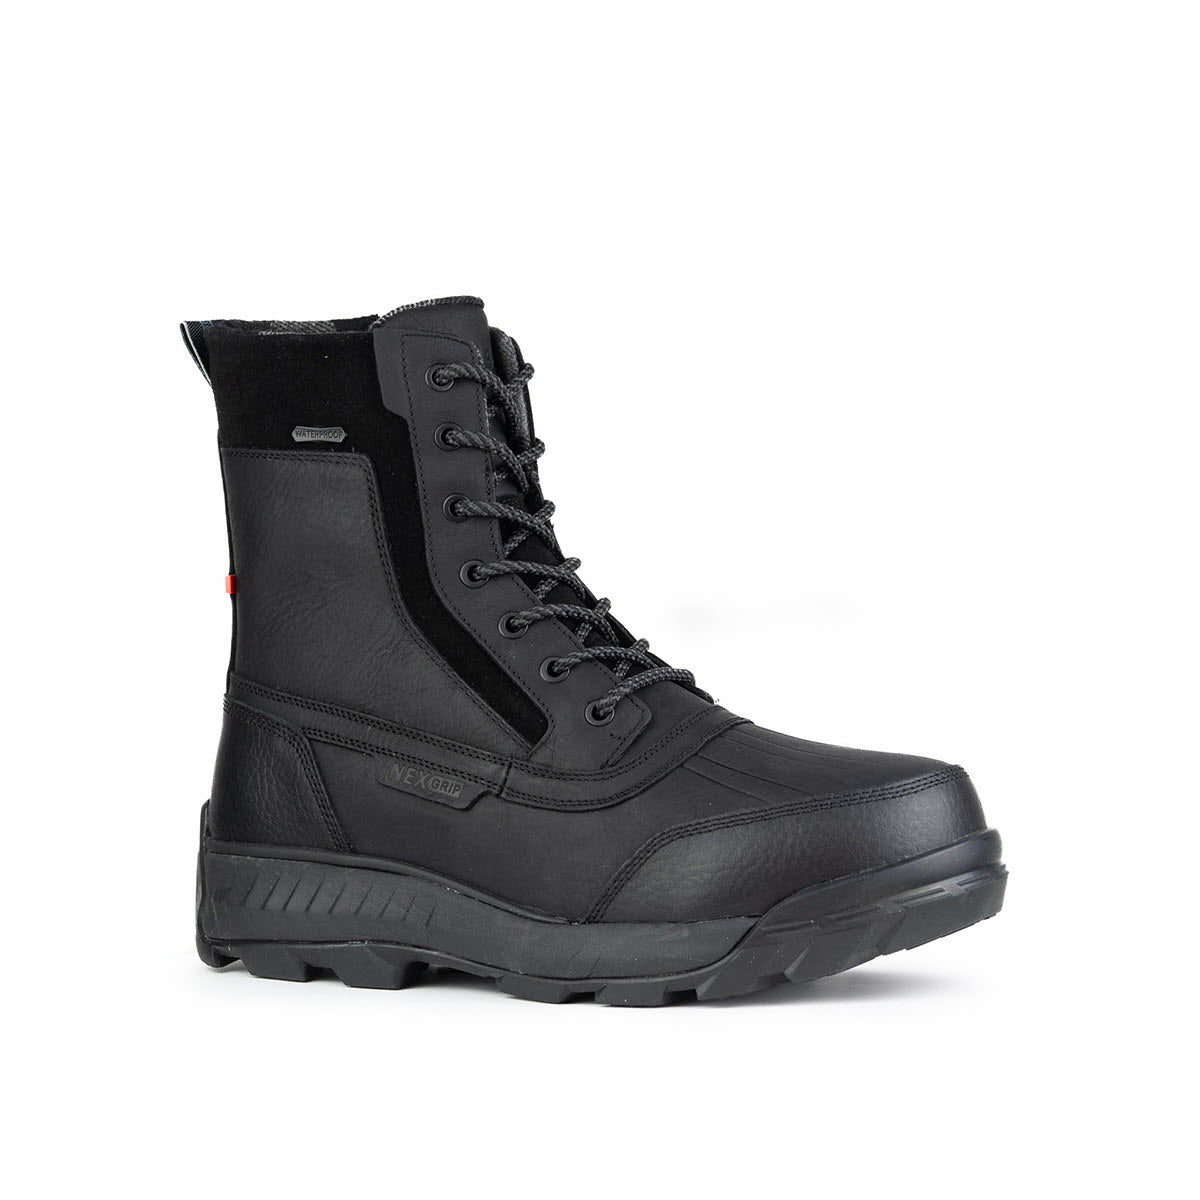 Black winter boot with waterproof uppers and laces, isolated on a white background, NexGrip NEWGRIP ICE MONT BLANC 3.0 BLACK - MENS.